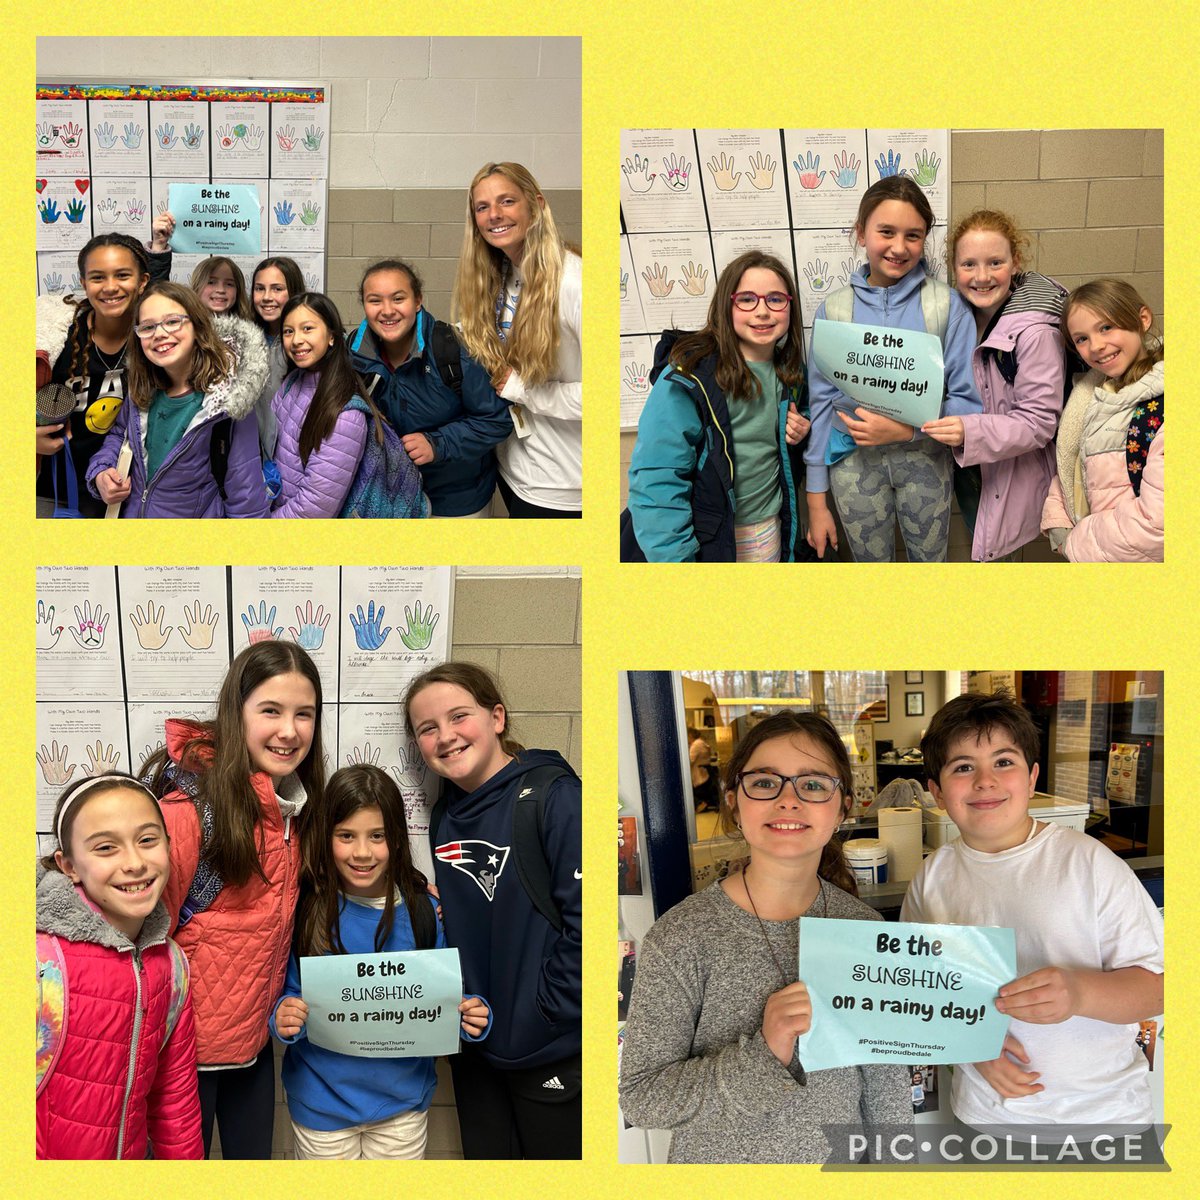 As we deal with all this 🌧️ today, #beproudbedale decided to turn to positivity & spread it far & wide. #positivesignthursday #medfieldps #goodvibes